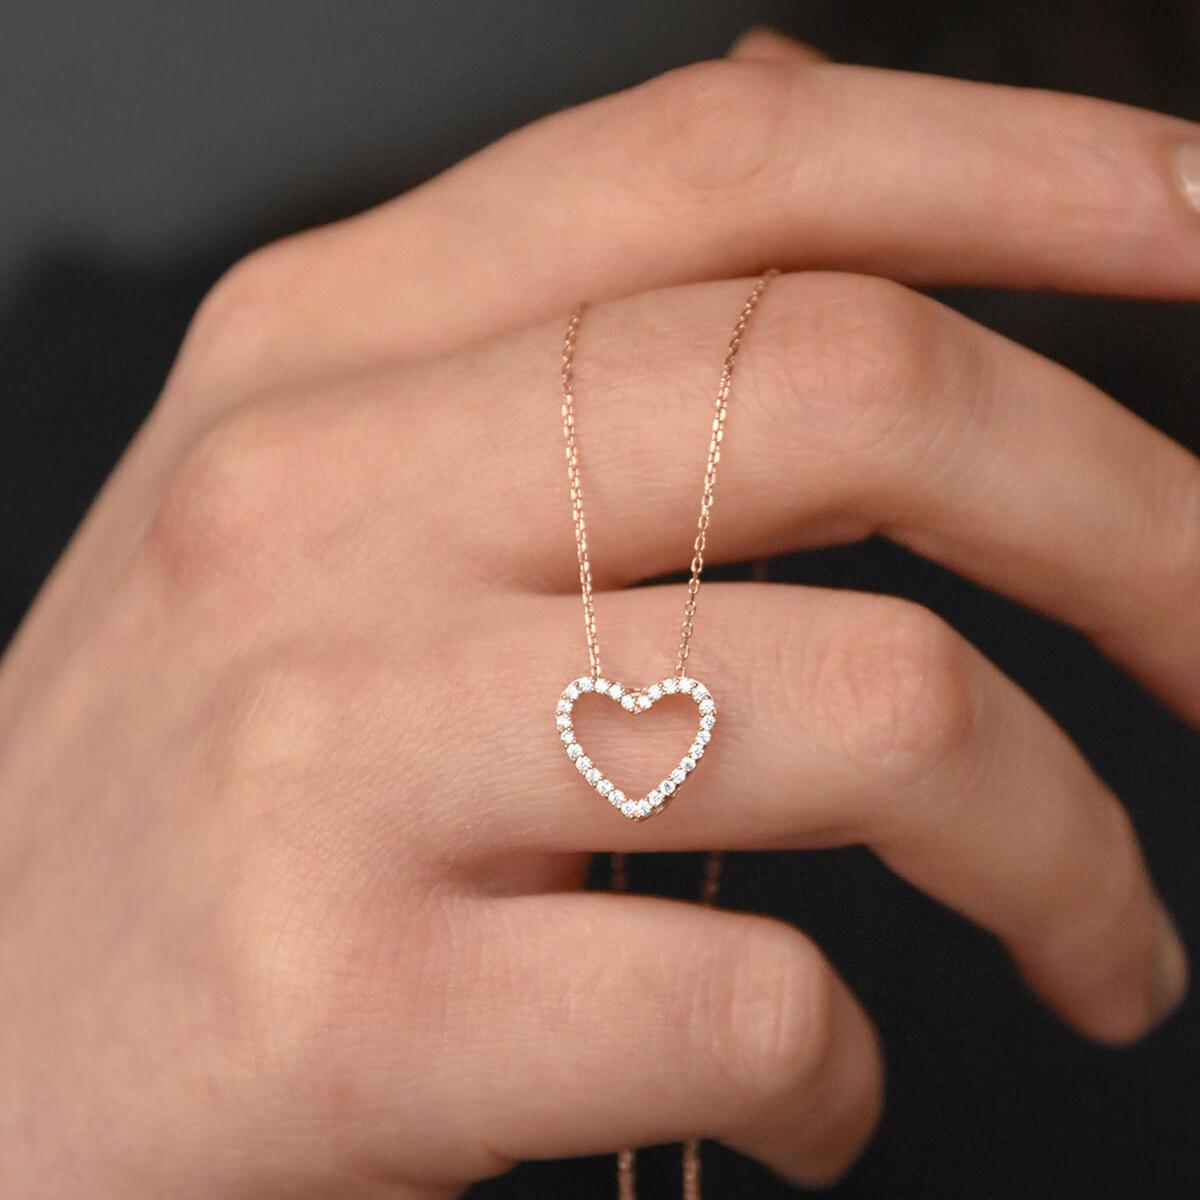 Heart Necklace Diamond • Heart Necklace Rose • Heart Shaped Necklace - Trending Silver Gifts